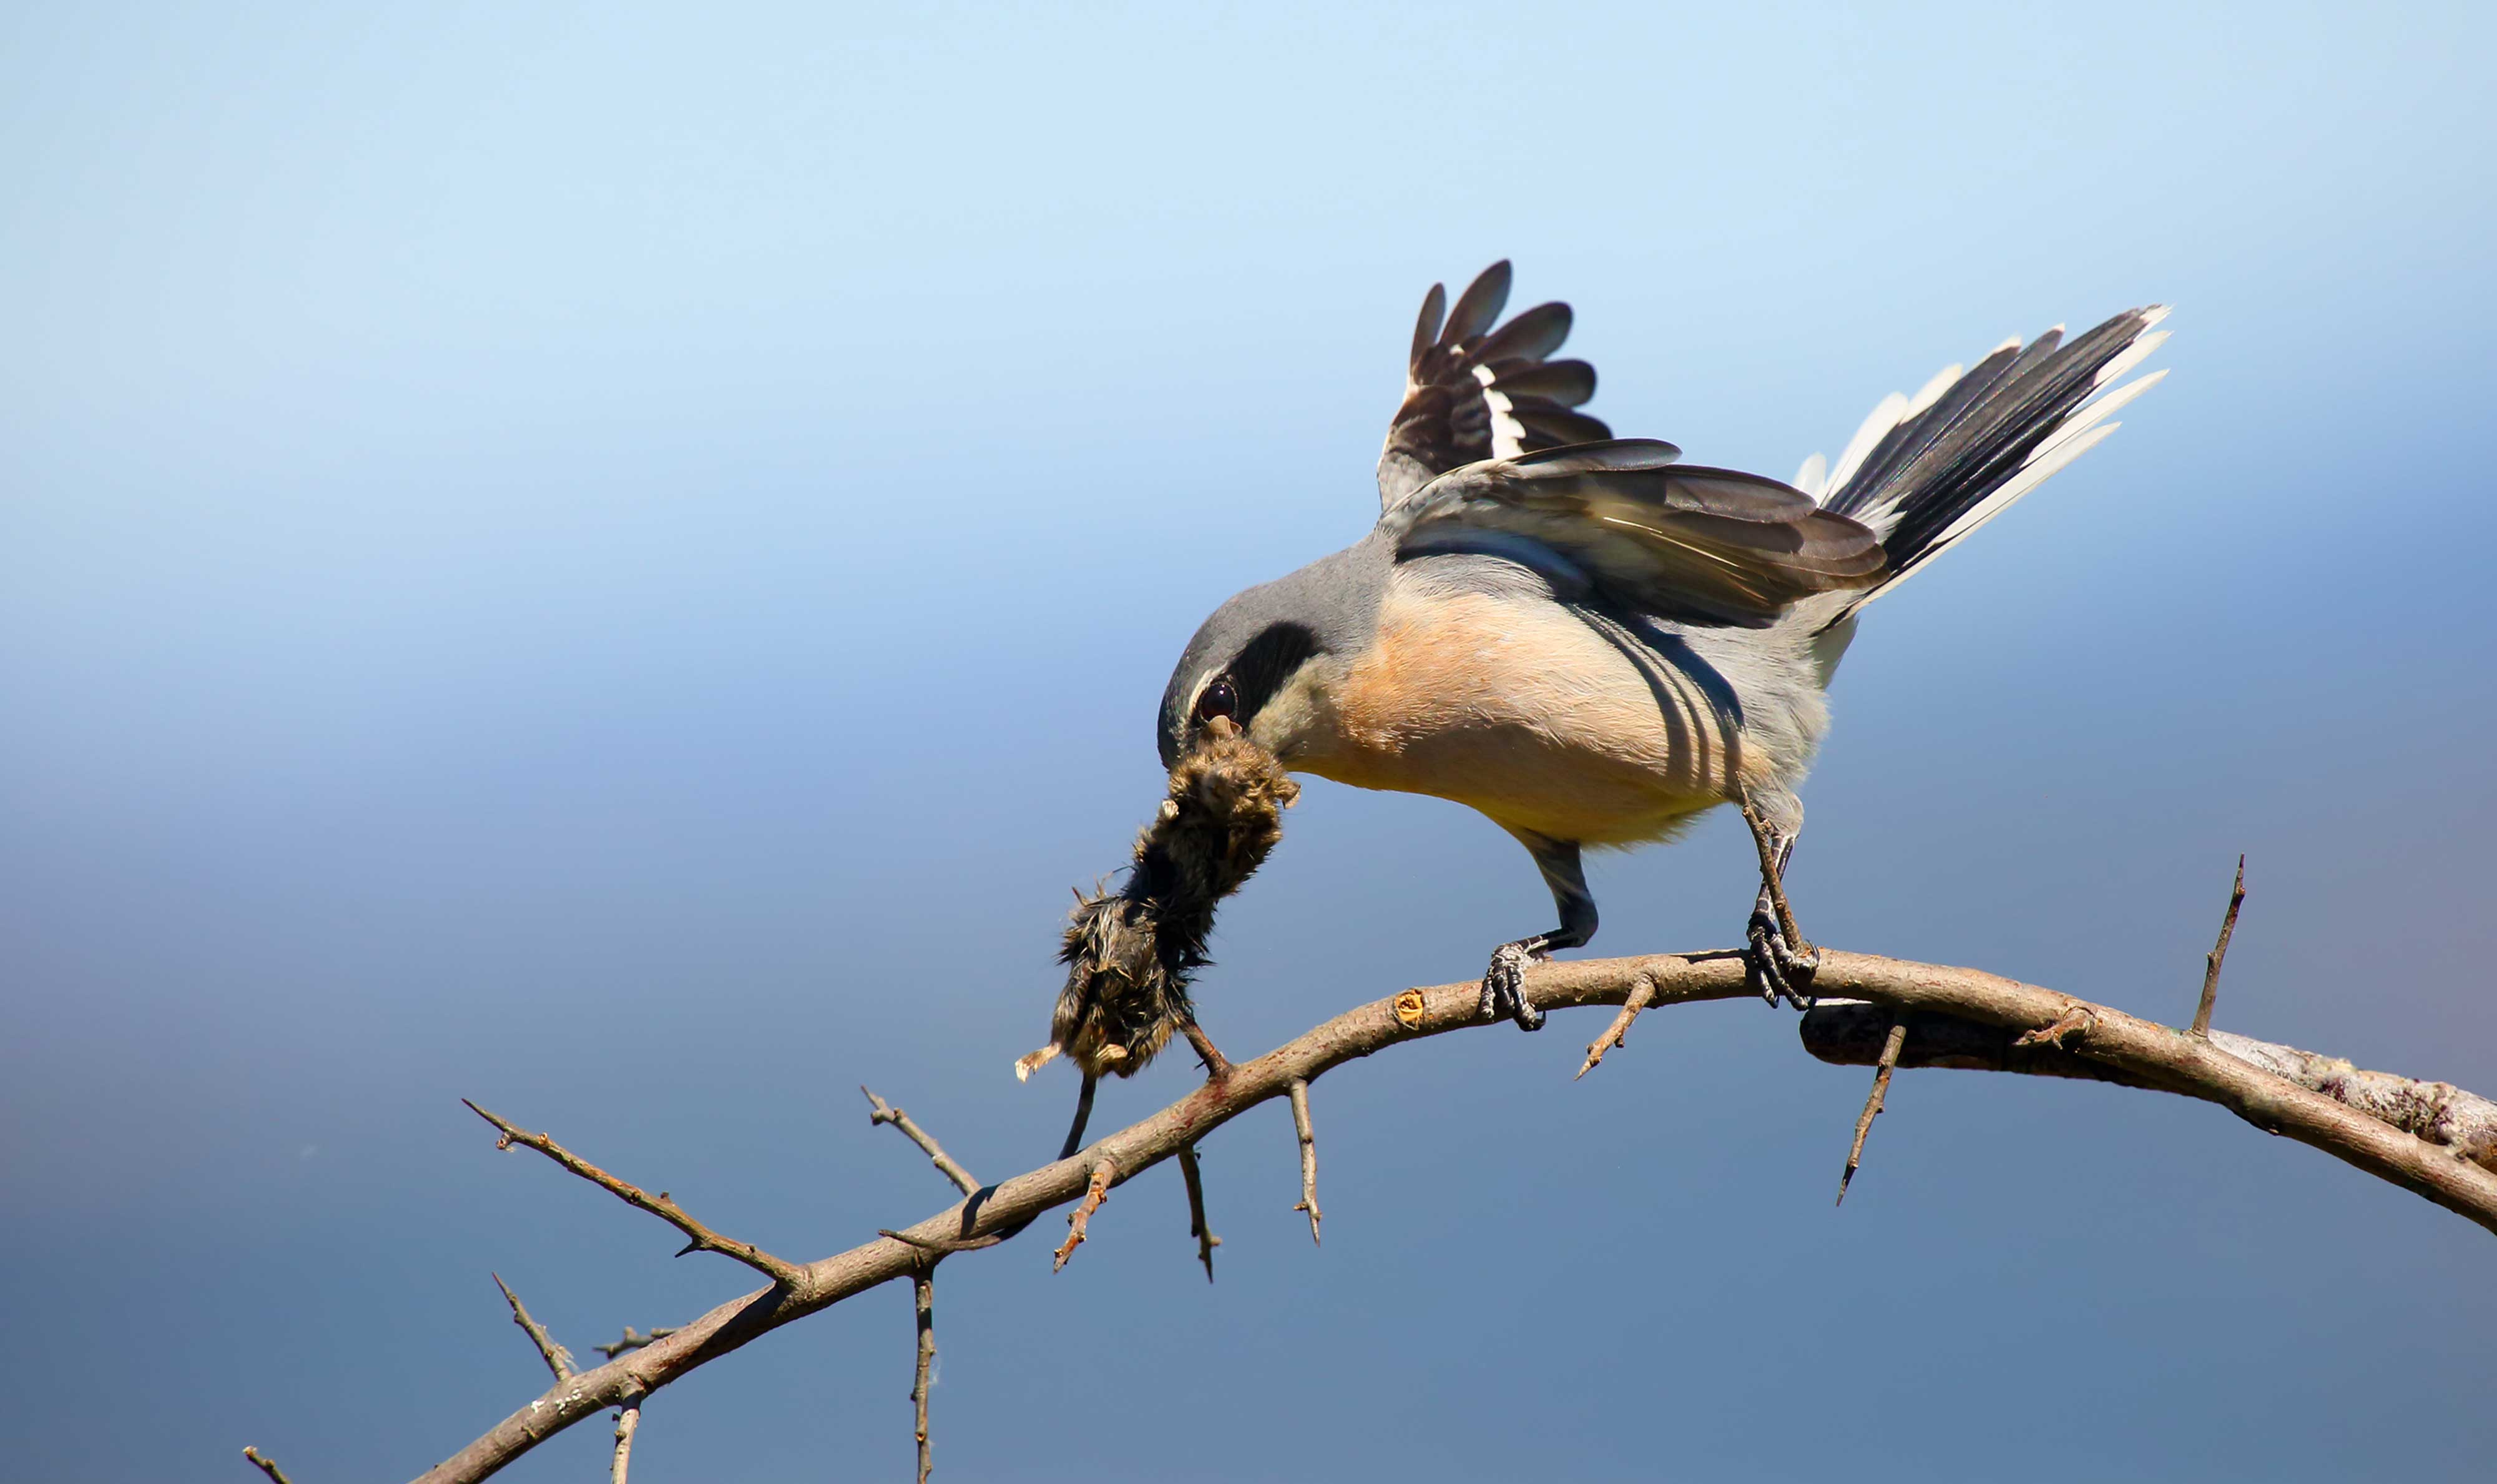 Northern shrike with its prey in its mouth